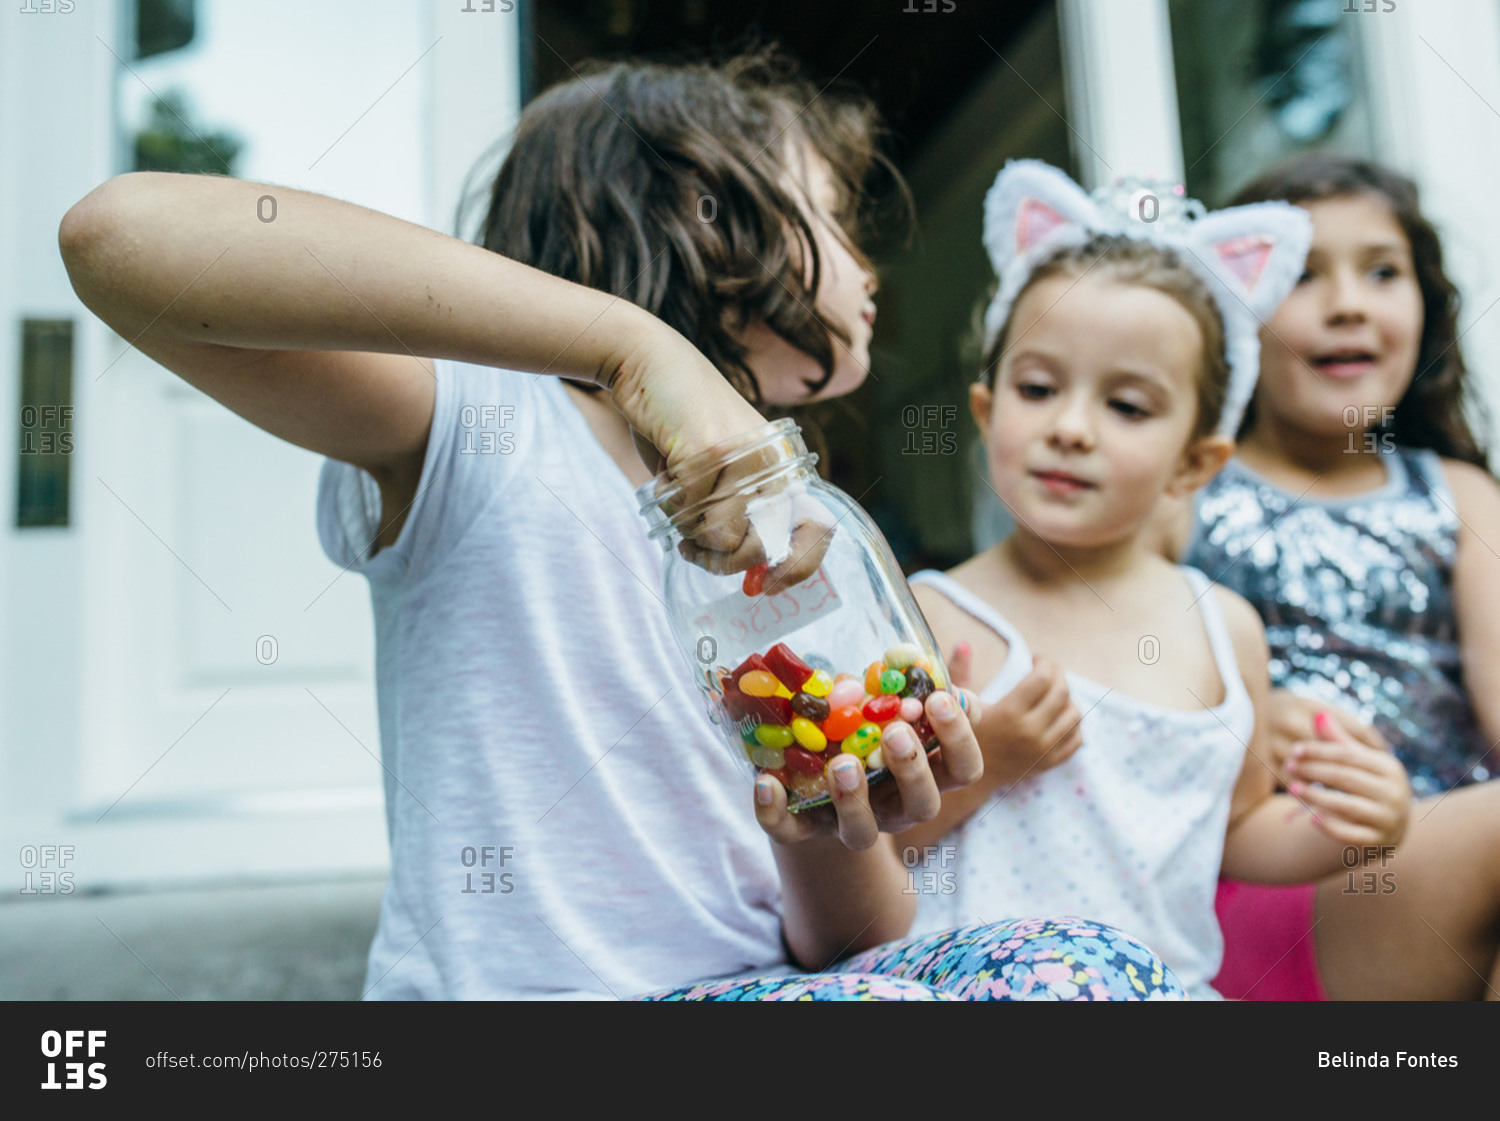 Girls sharing a jar of jelly beans